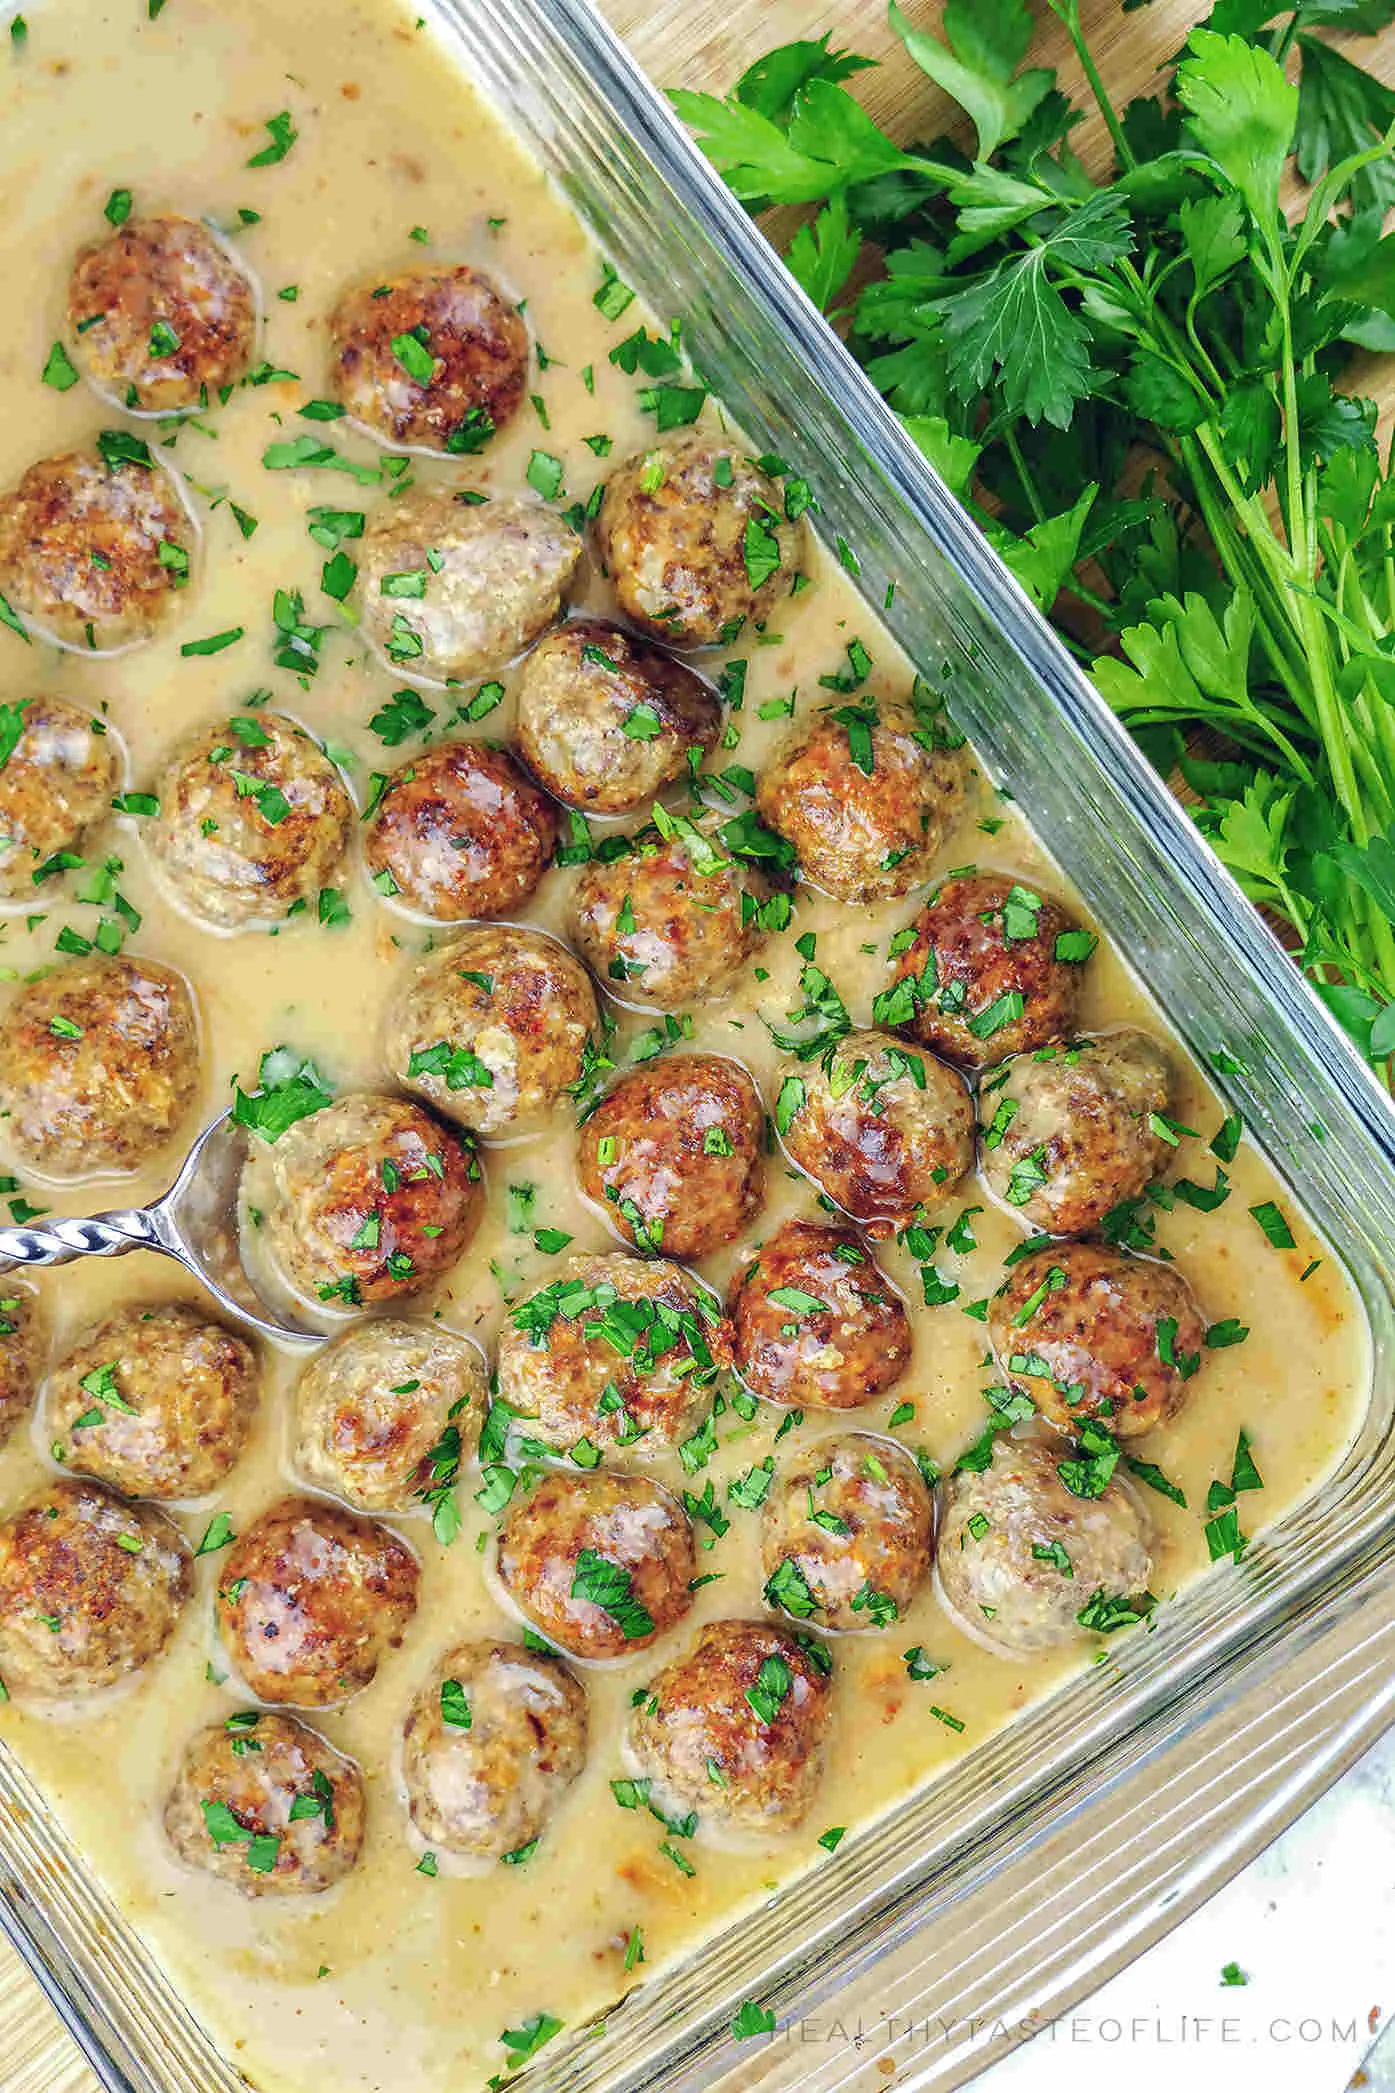 Easy gluten free Swedish meatballs with dairy free sauce (+ whole30, paleo and keto options), oven baked. 